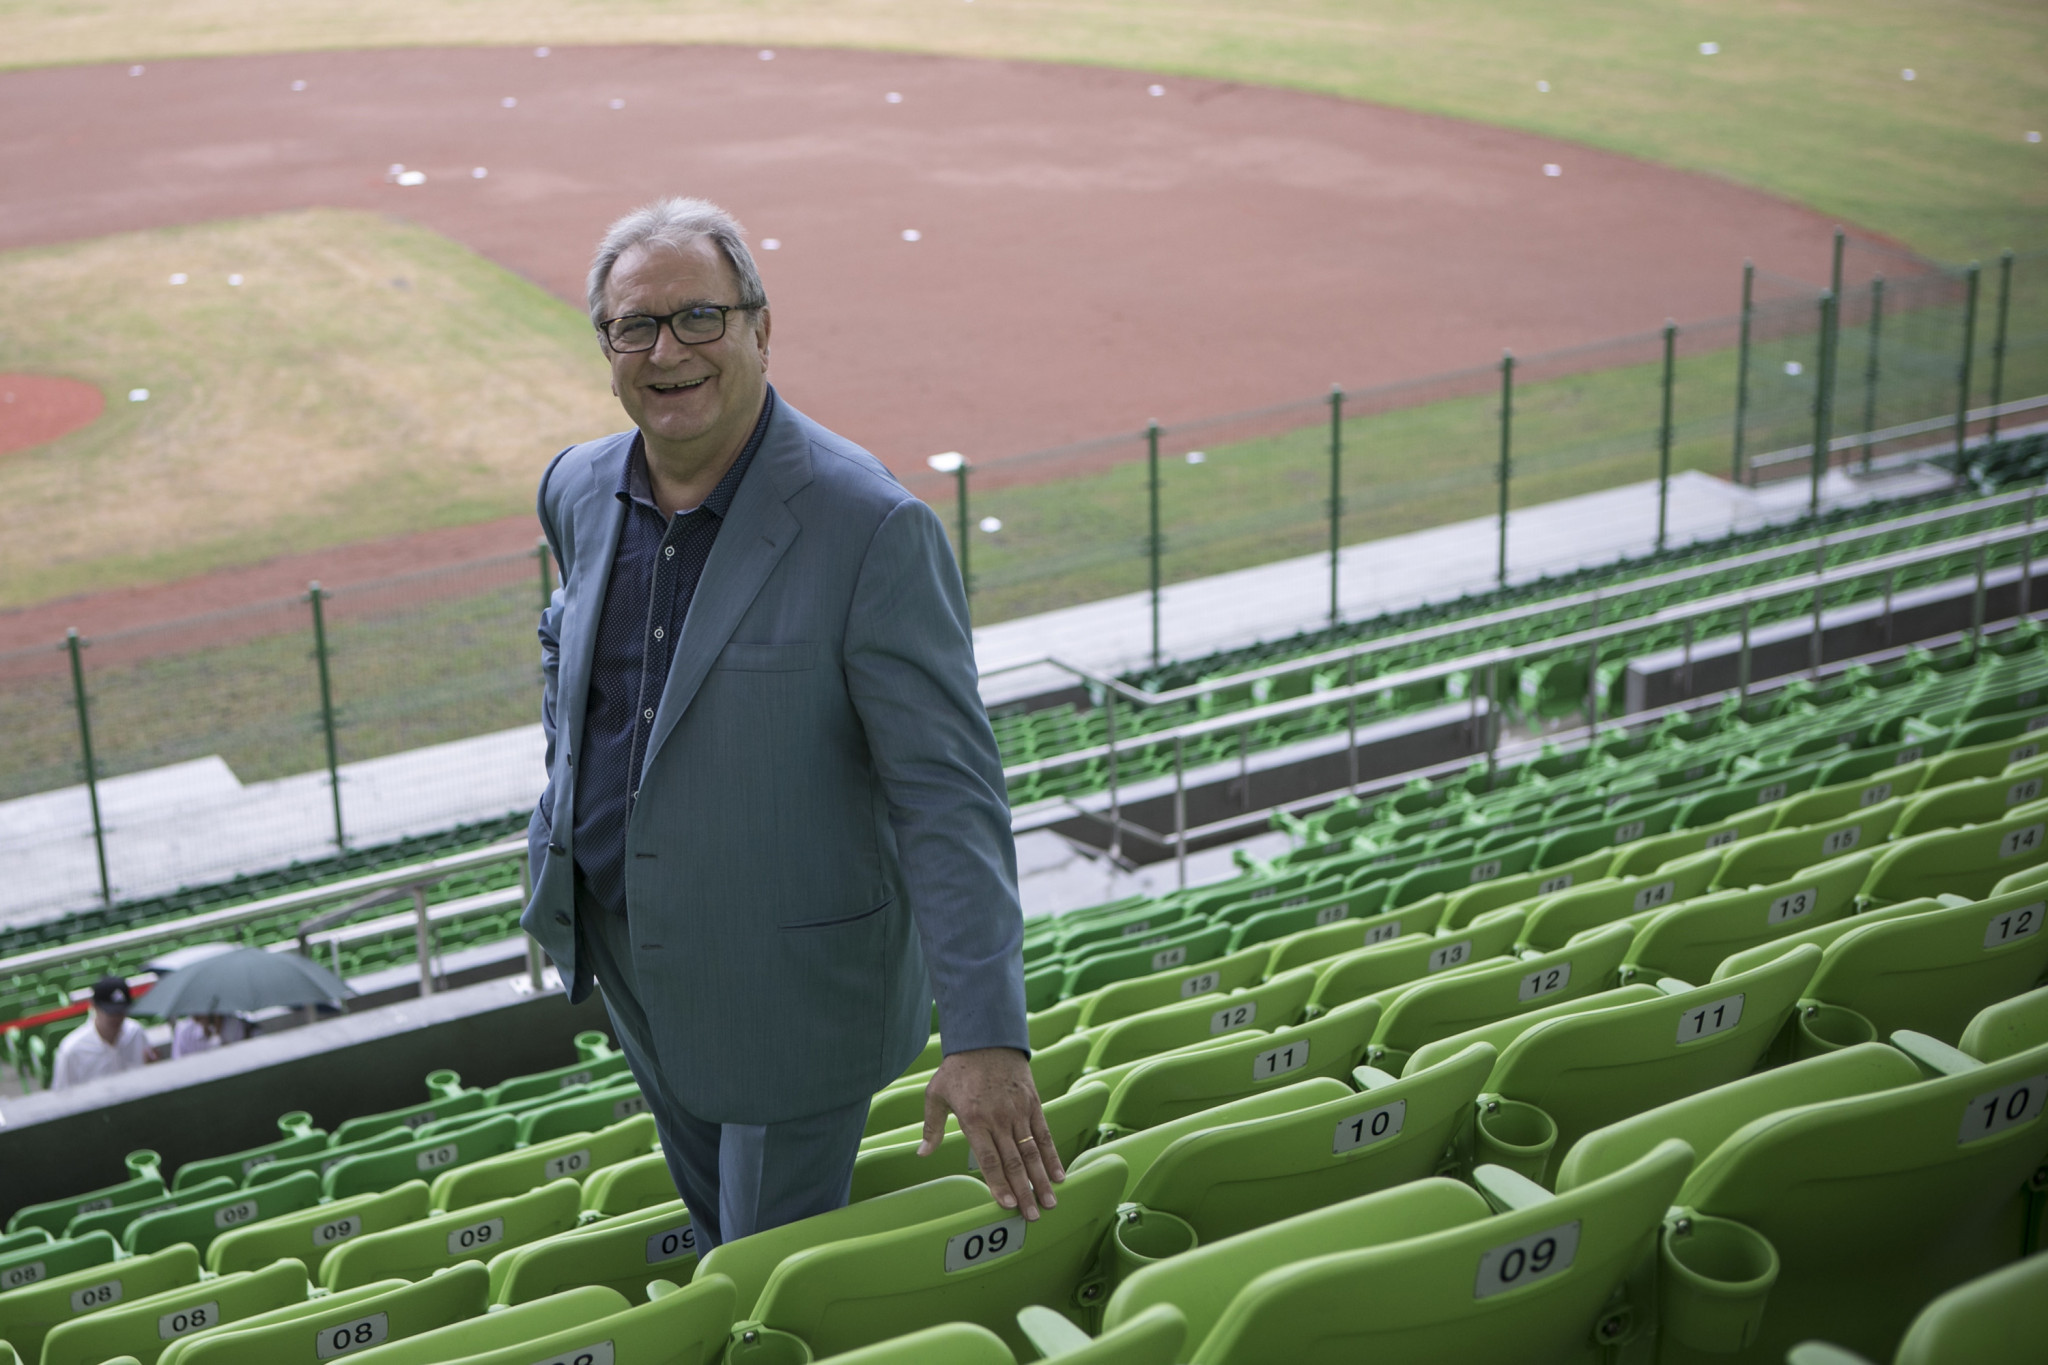 WBSC President Riccardo Fraccari pictured at Tainan Asia Pacific Stadiums, which will host the next four editions of the Under-12 Baseball World Cup ©Getty Images